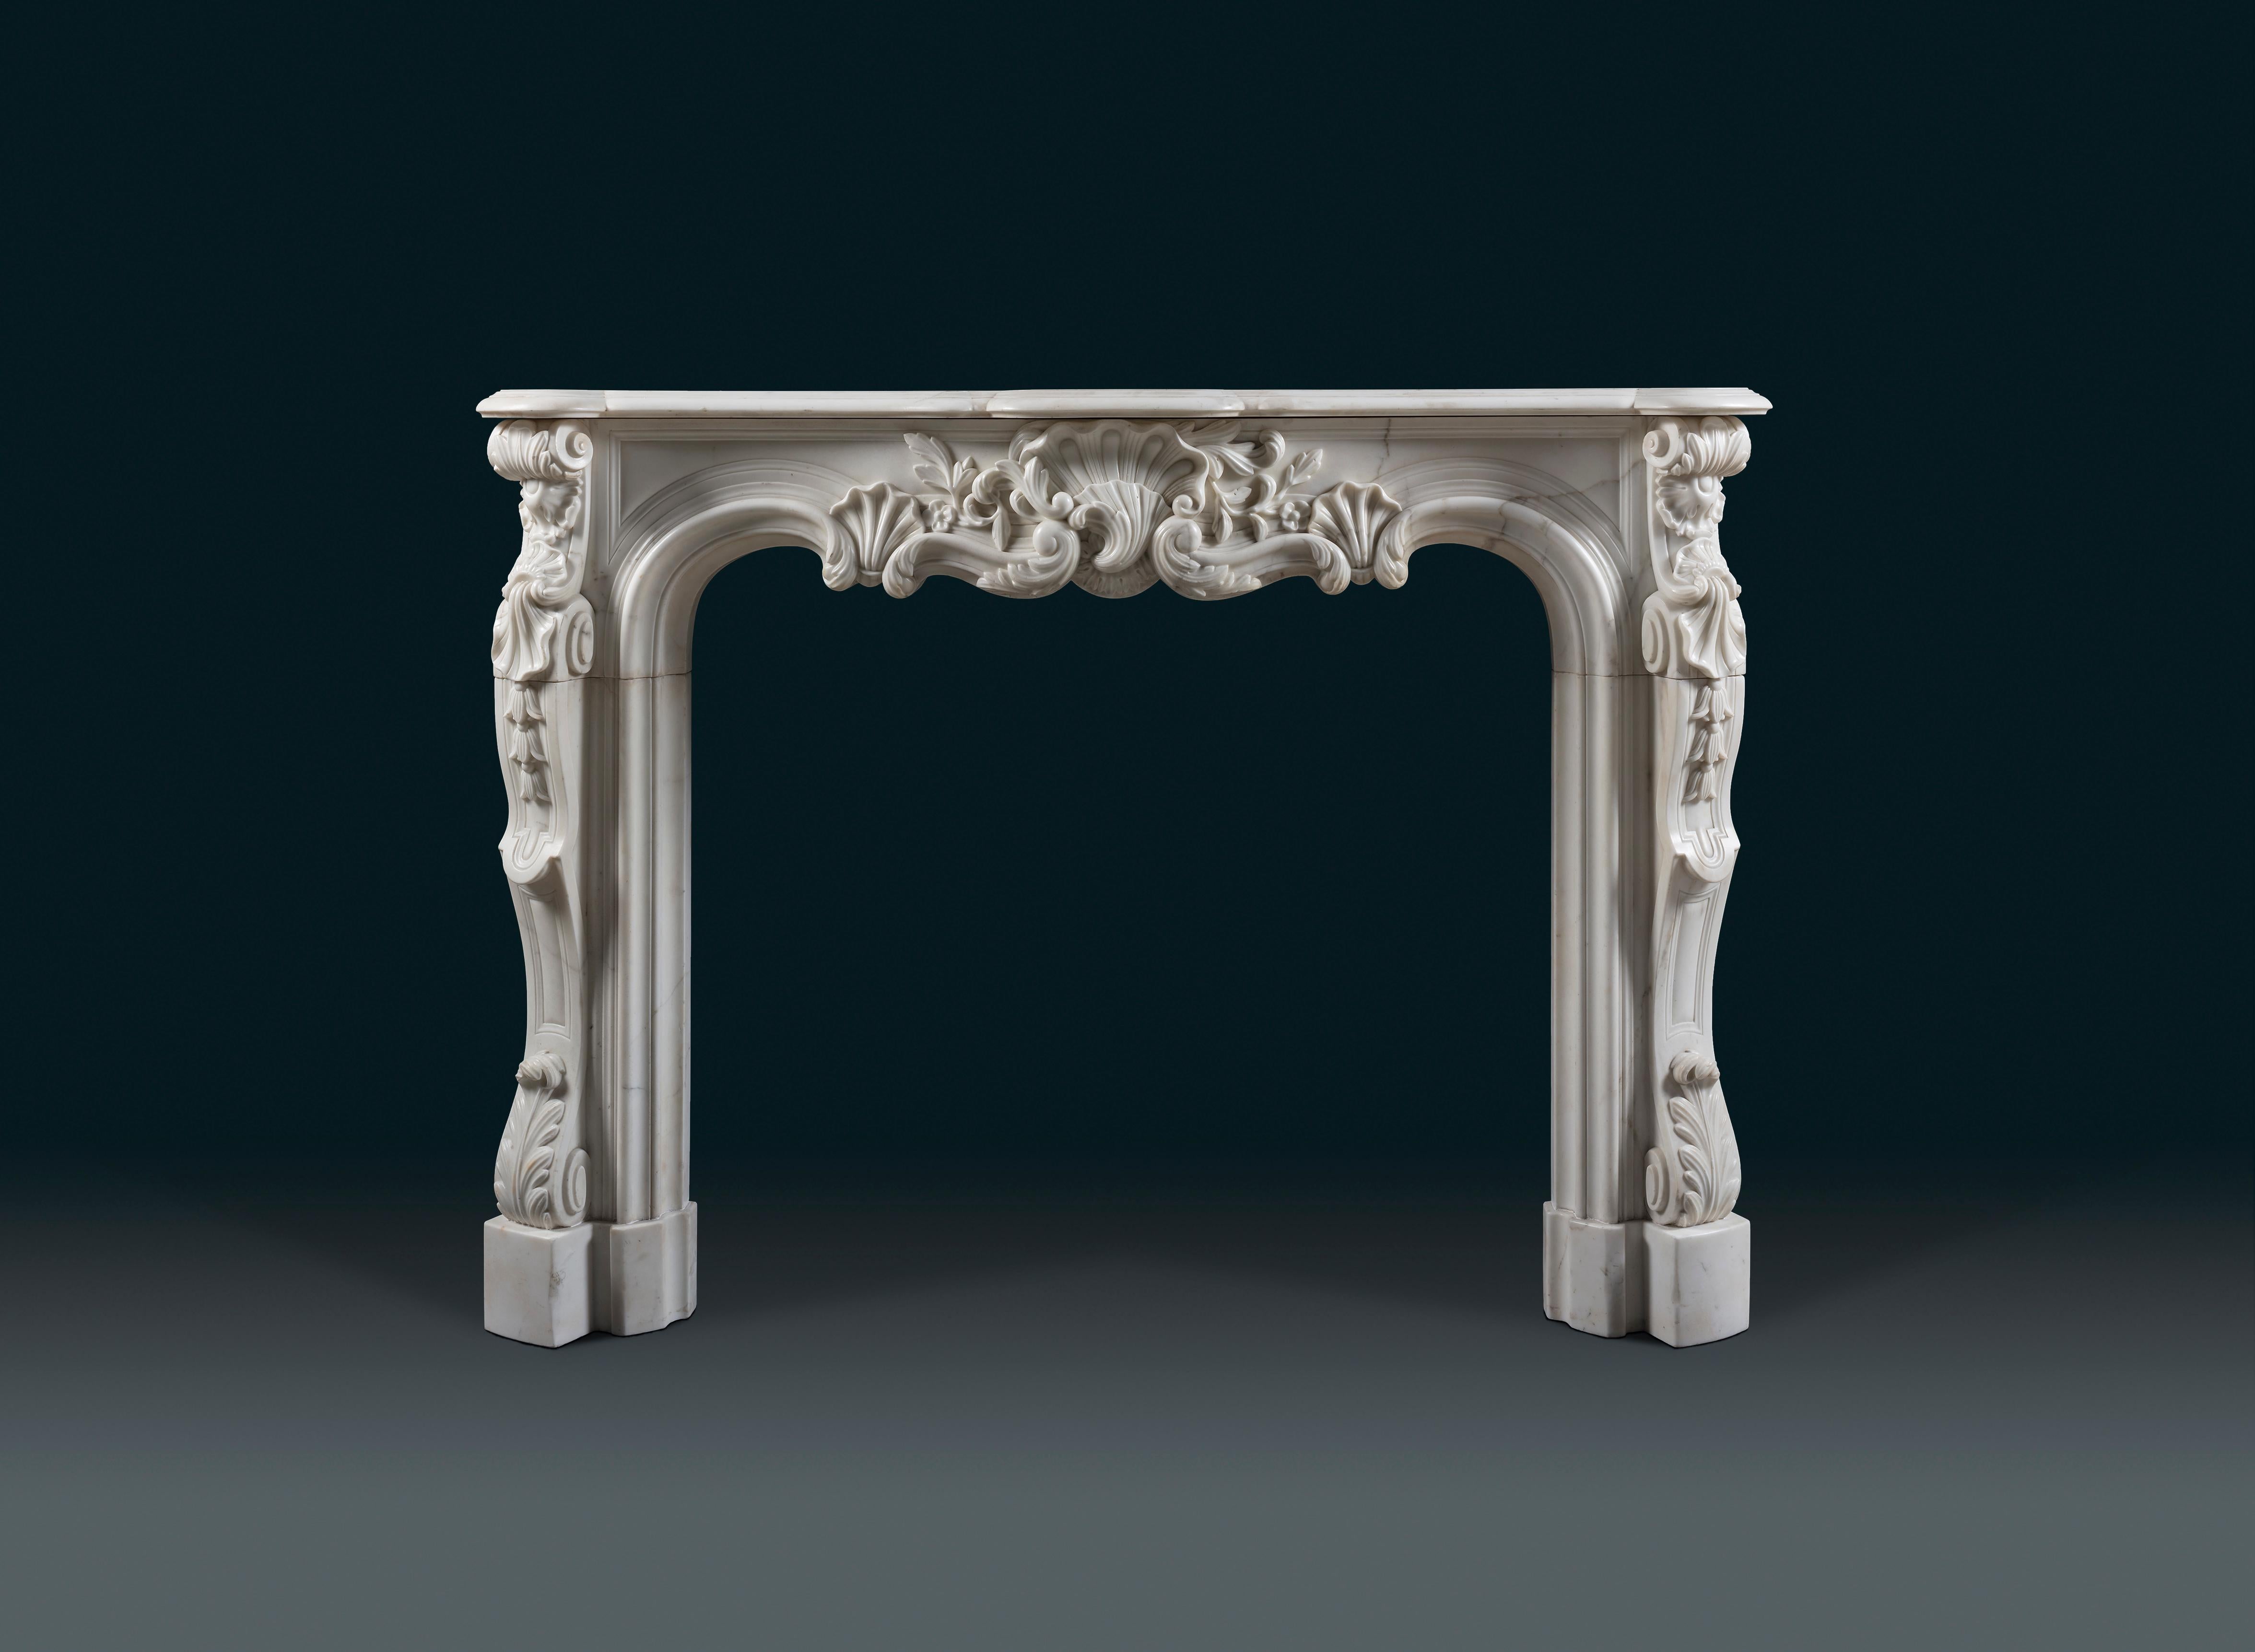 An elaborate 19th century Rococo chimneypiece in Louis XV style with an elegant, moulded shelf. The fine asymmetric serpentine frieze presents a central cartouche in the shape of a stylised shell, flanked by foliage and panels. Shell corner-blocks